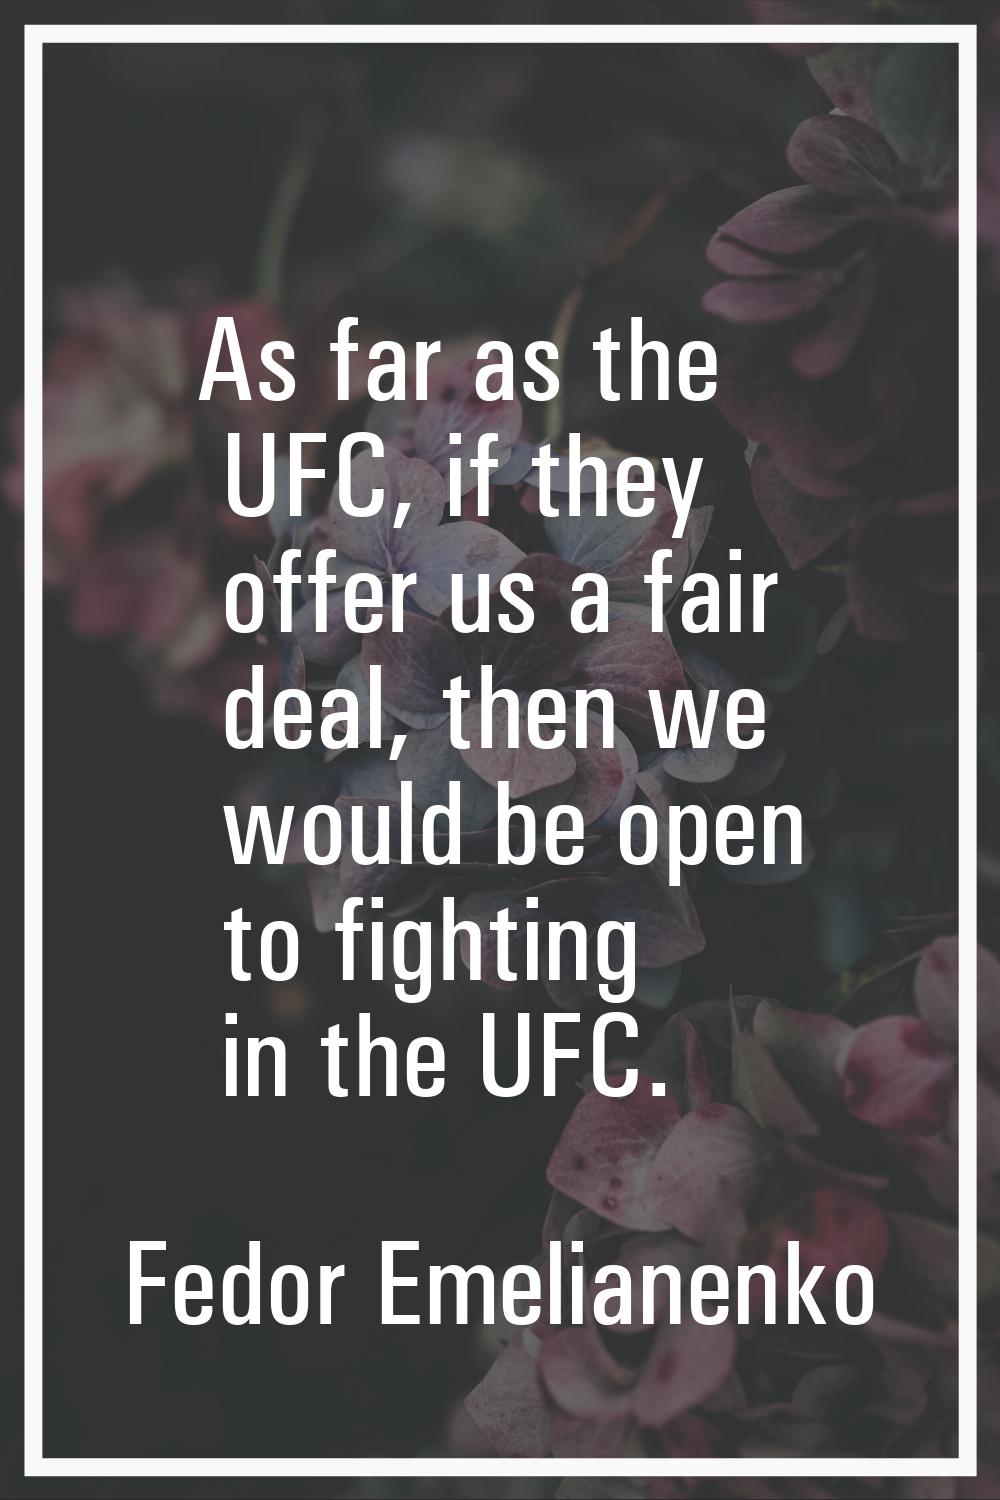 As far as the UFC, if they offer us a fair deal, then we would be open to fighting in the UFC.